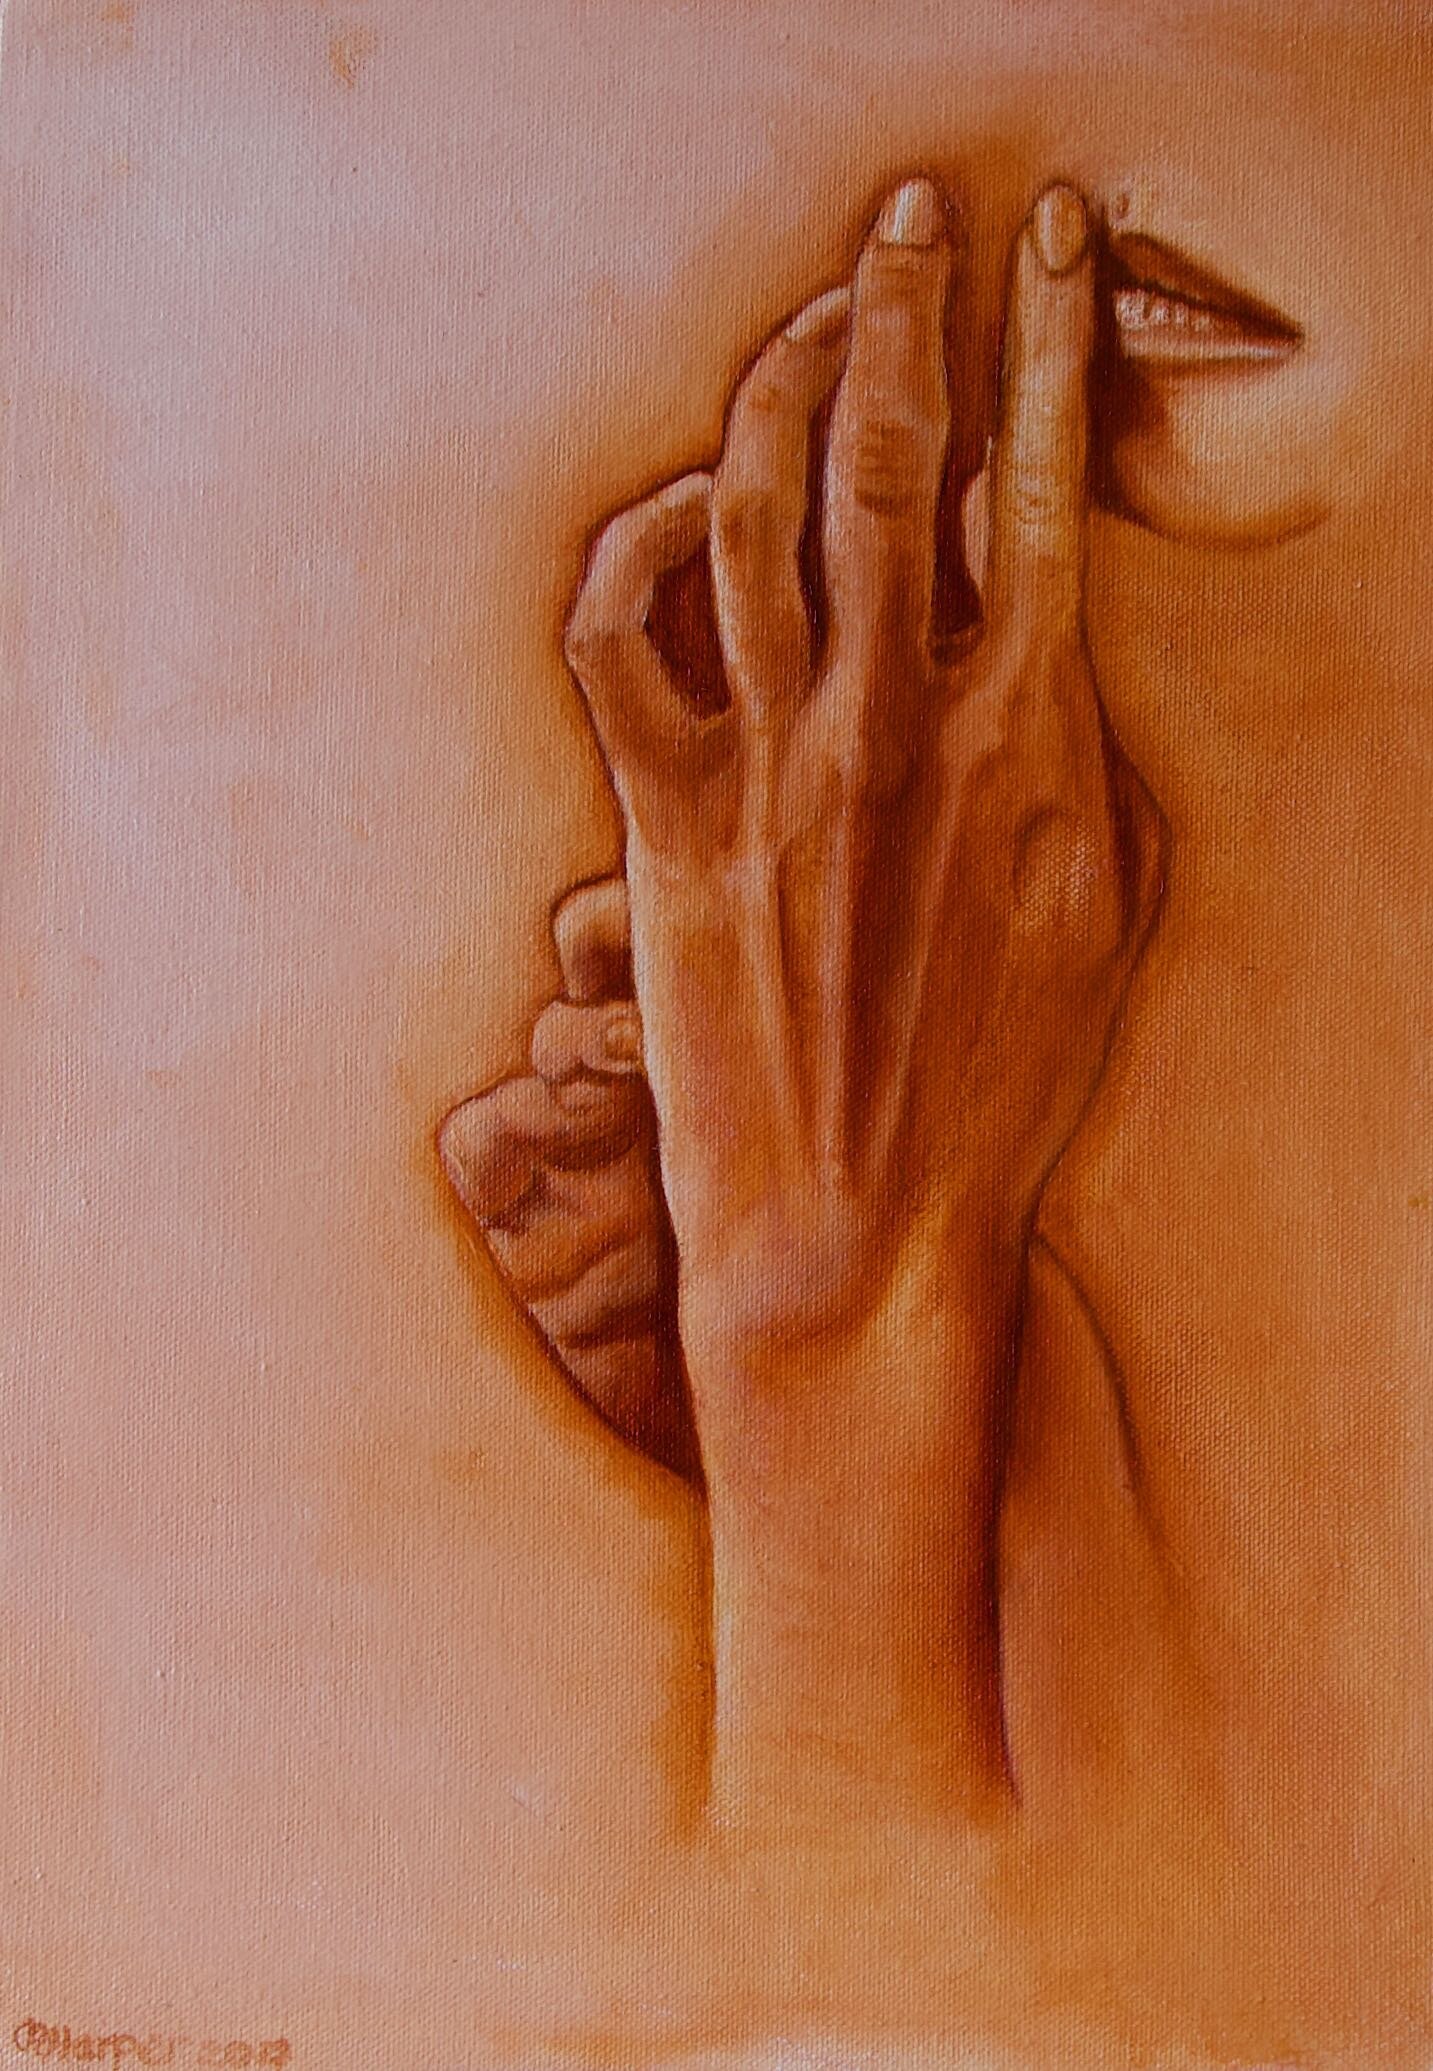 Her Moment (Oil on Canvas)